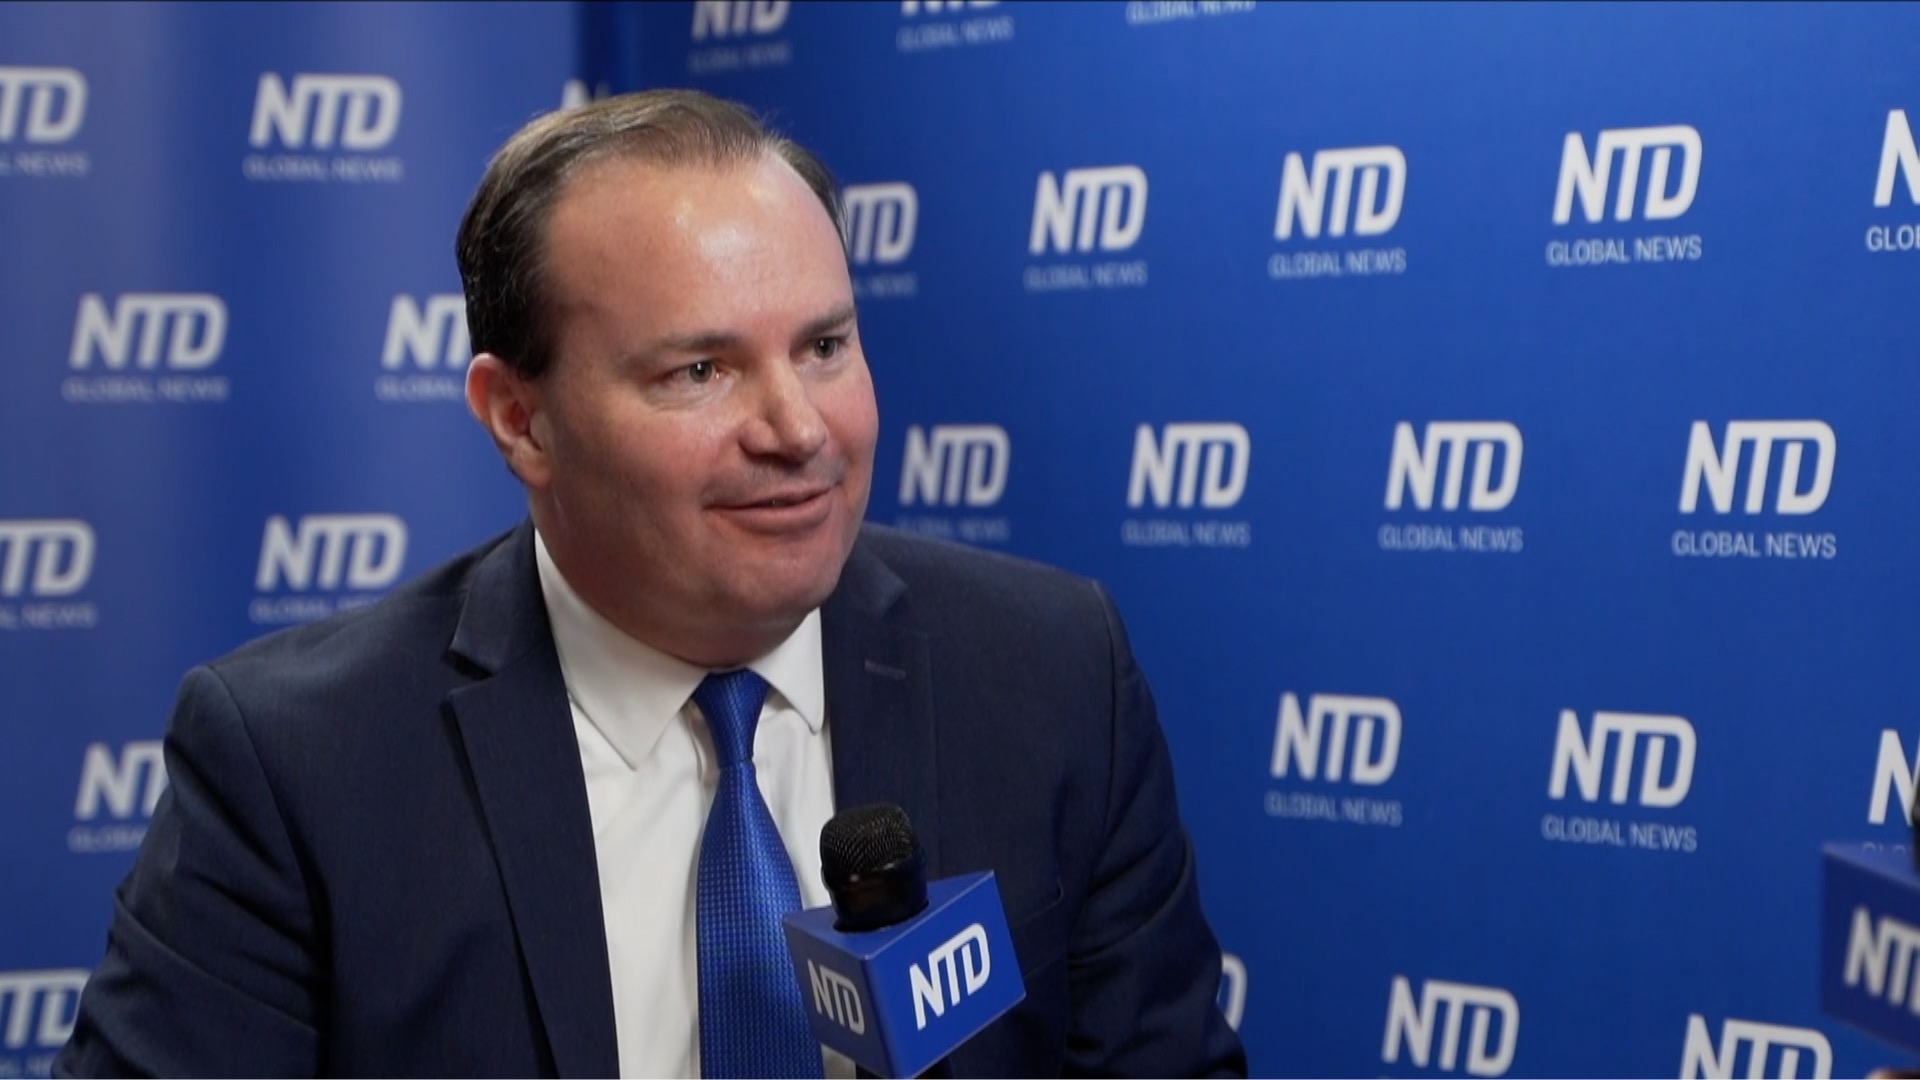 The Nation Speaks (Feb. 27): Senator Mike Lee, KT McFarland, Kash Patel, and More at CPAC